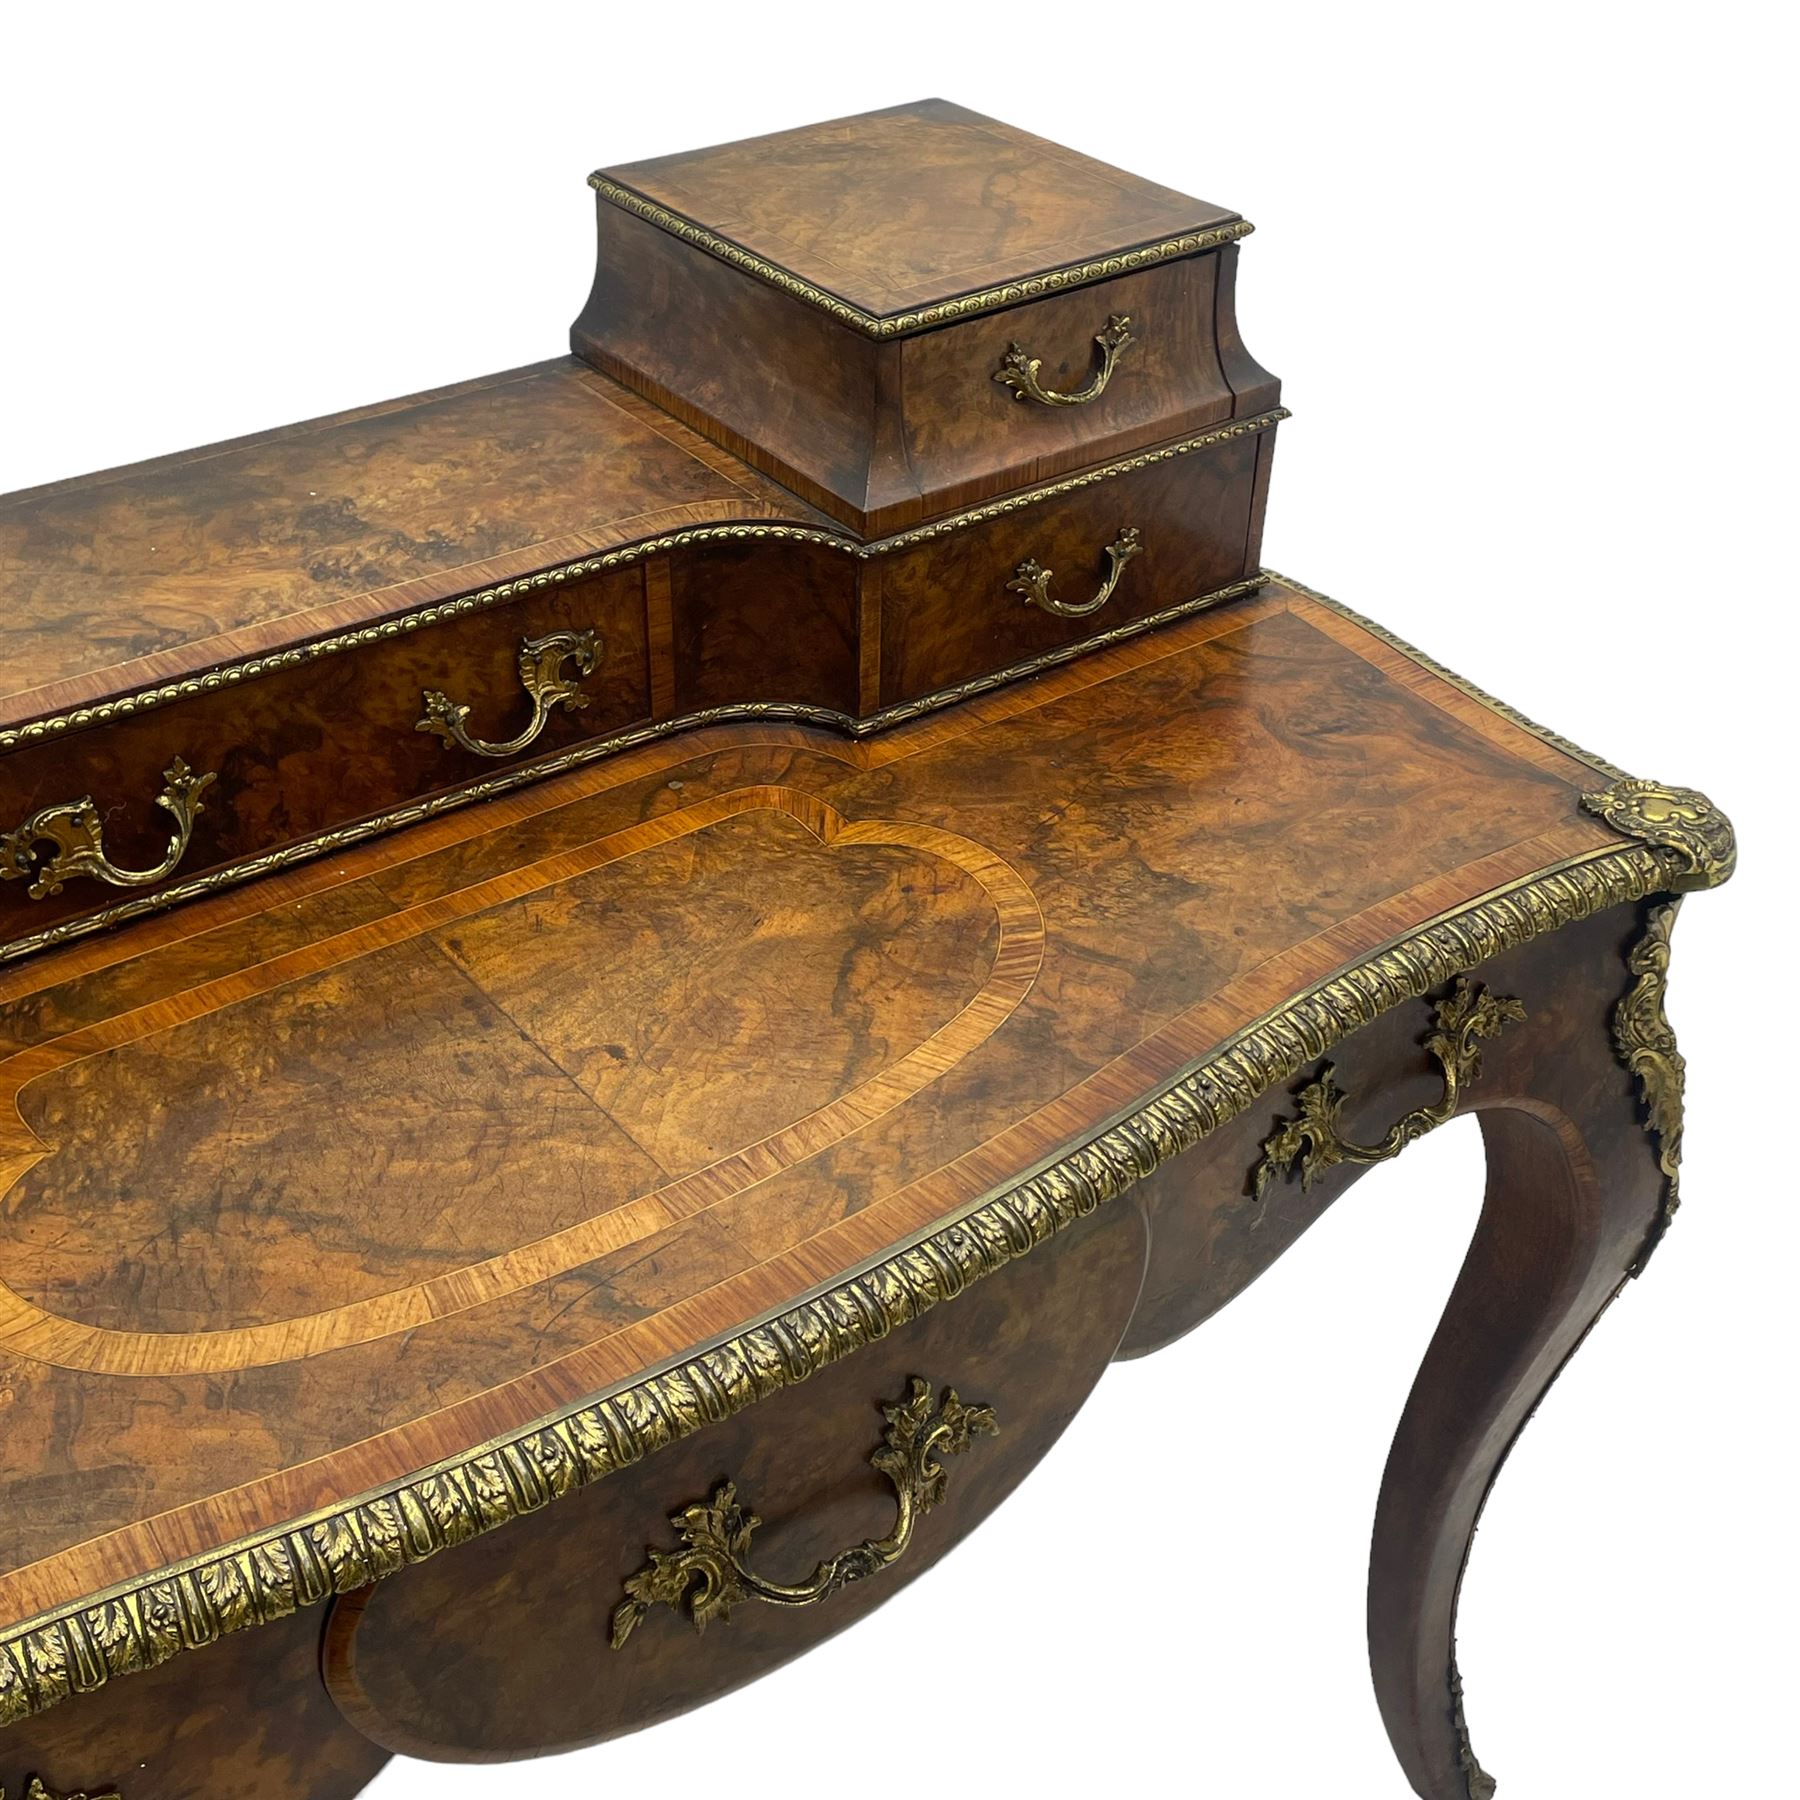 Late 19th to early 20th century French figured walnut writing desk - Image 11 of 13